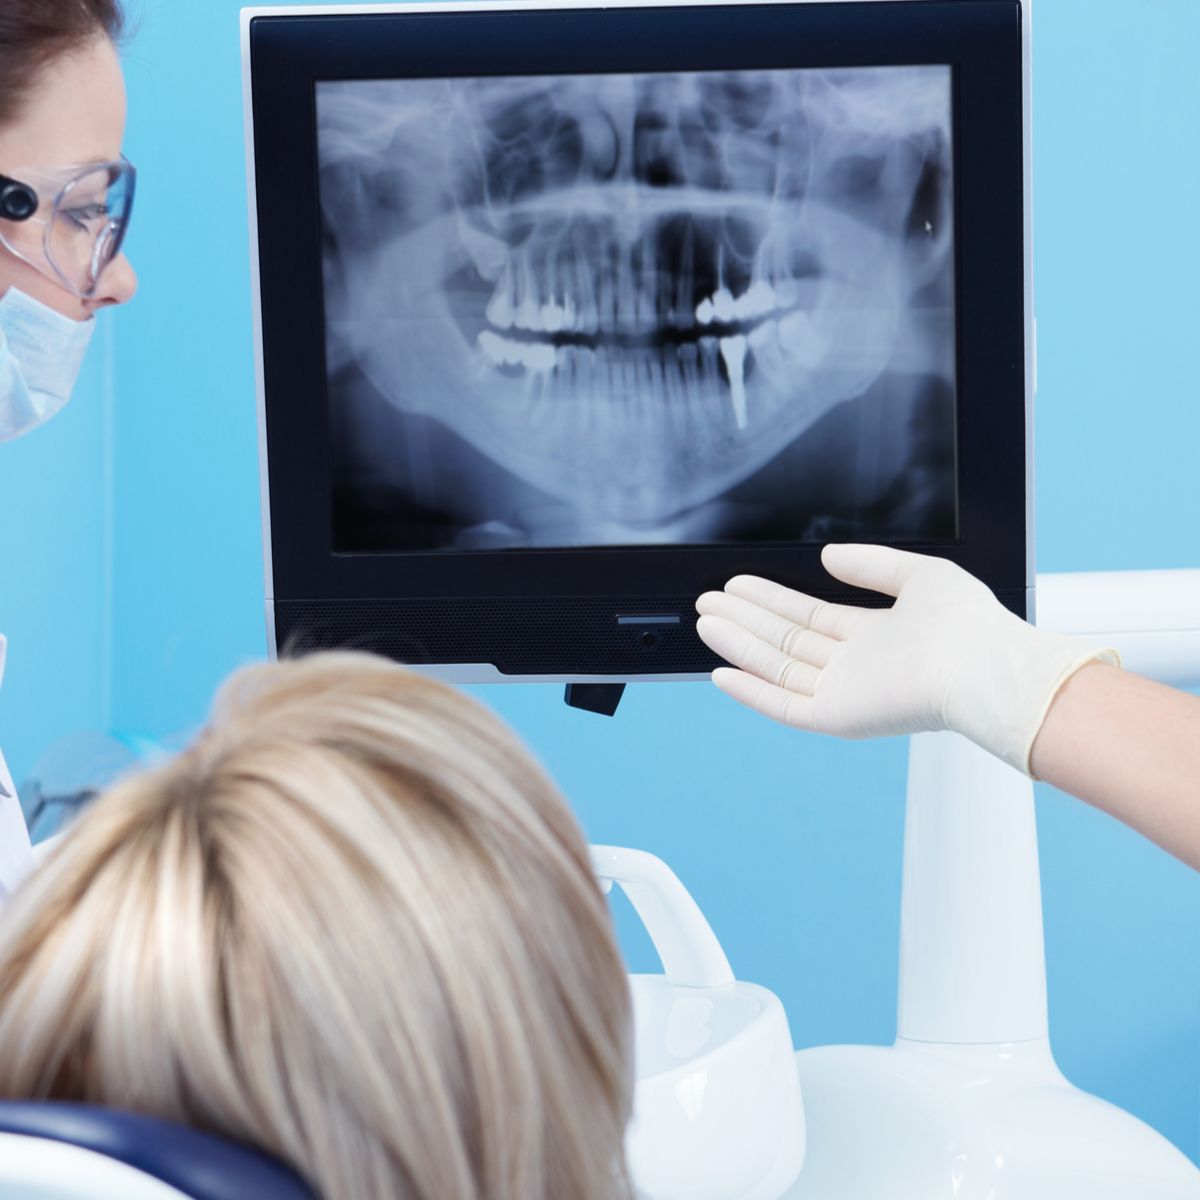 dentist looking on x-ray